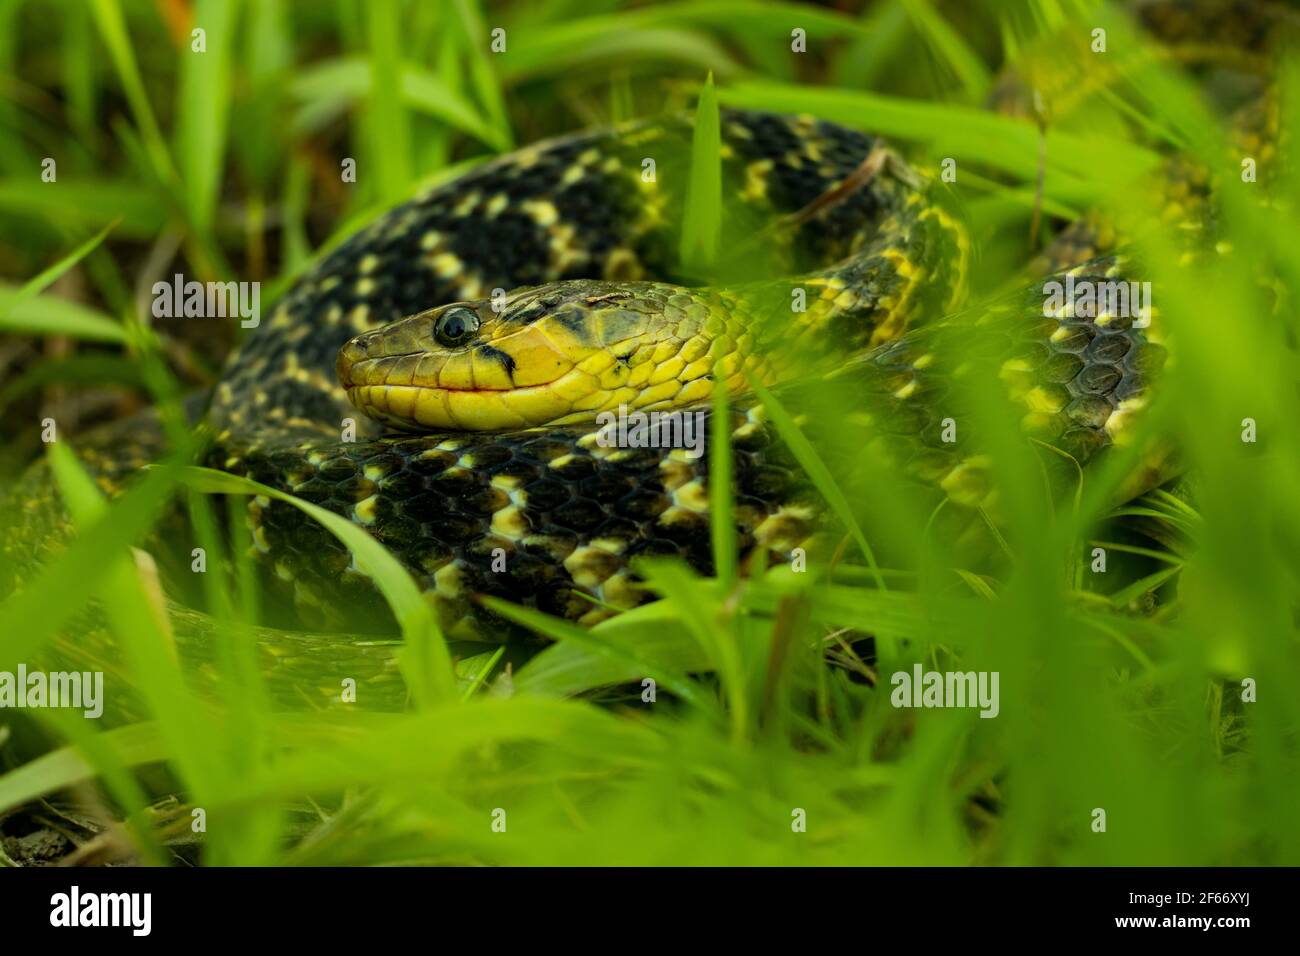 Buff striped keelback yellow and black striped snake sits in the green grass looking for food Stock Photo